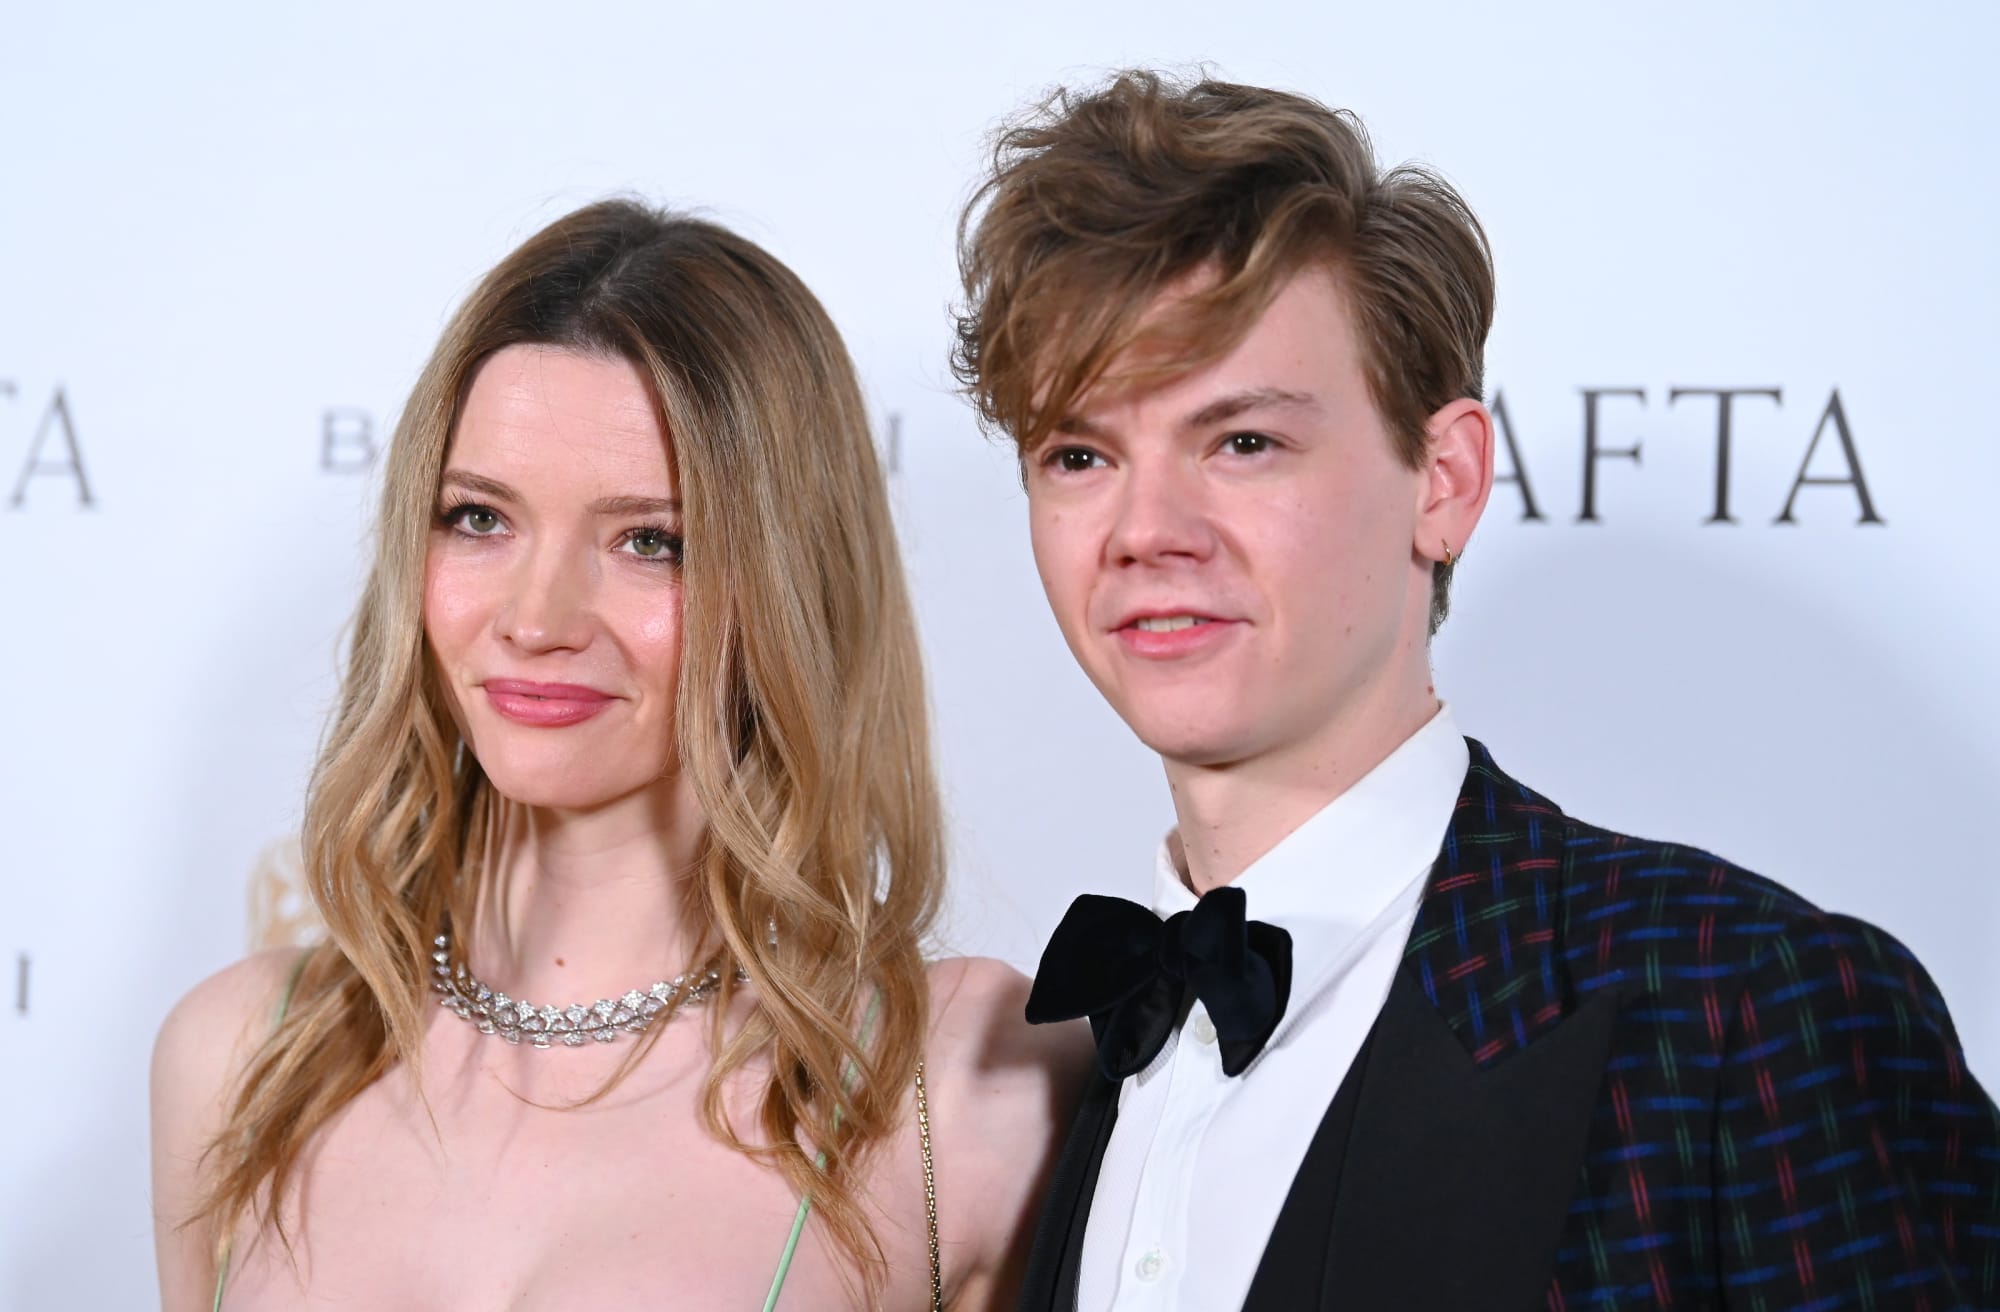 Game of Thrones star Thomas Brodie-Sangster dating Elon Musk's ex-wife